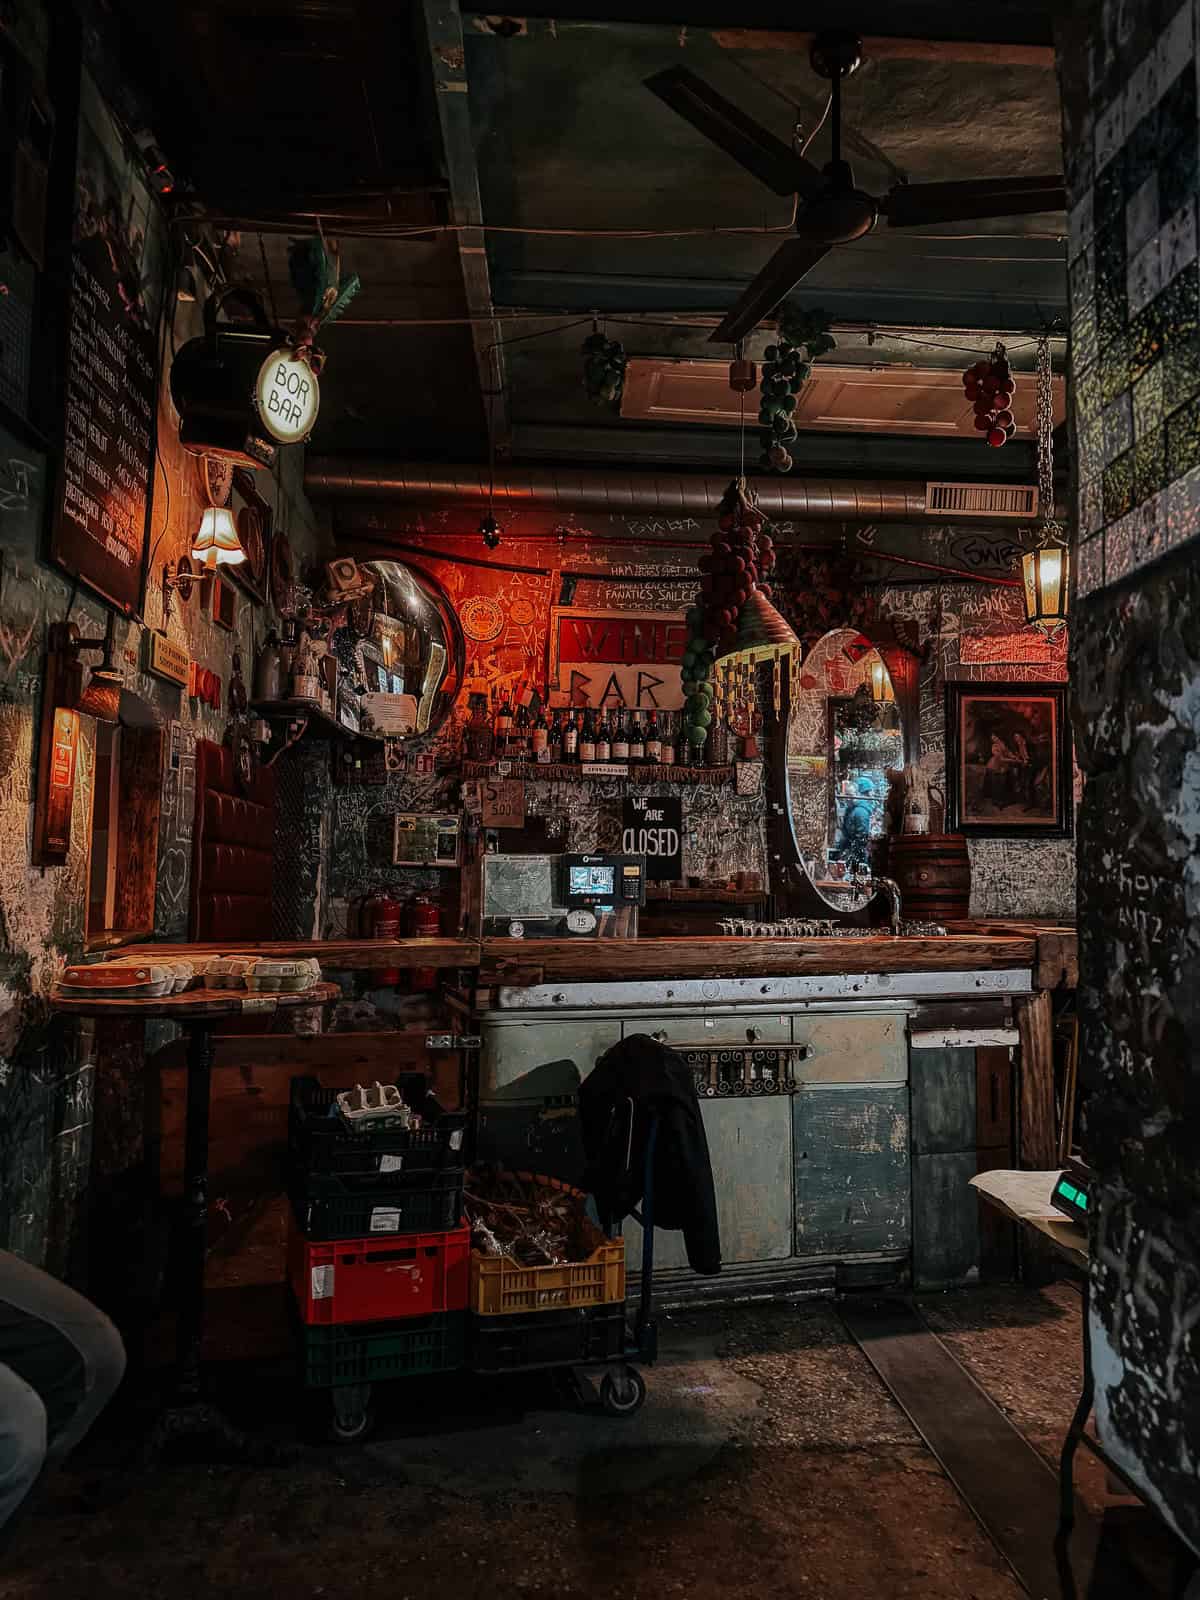 A dimly lit, rustic bar with a cozy atmosphere, featuring a vintage bar counter, hanging grapes decor, and a sign that reads 